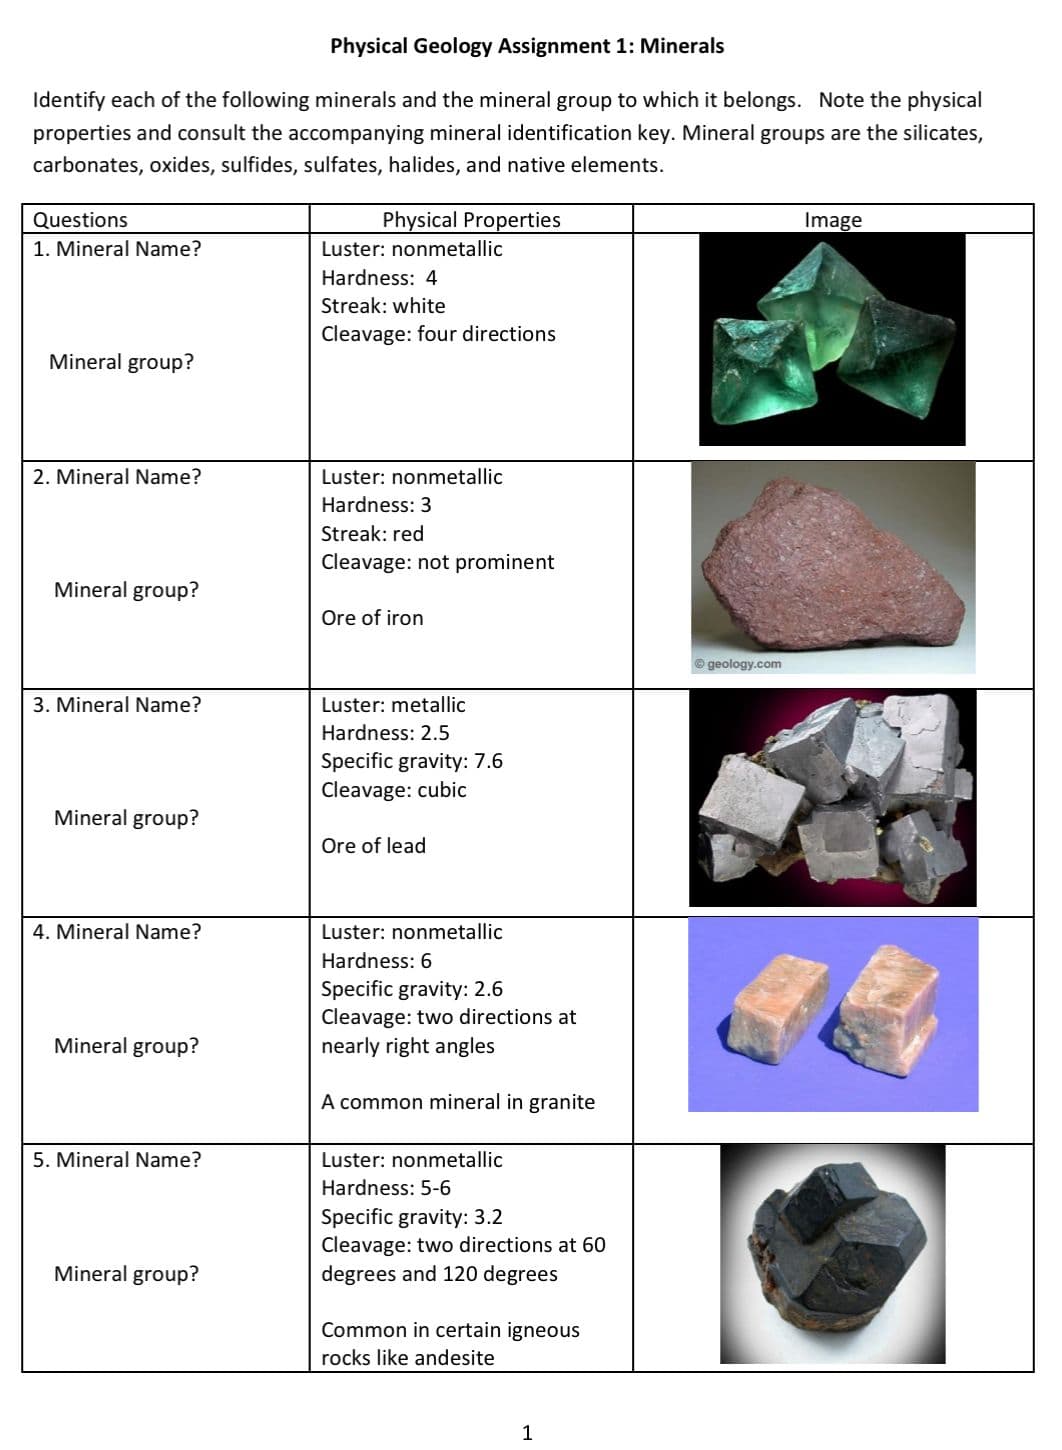 Physical Geology Assignment 1: Minerals
Identify each of the following minerals and the mineral group to which it belongs. Note the physical
properties and consult the accompanying mineral identification key. Mineral groups are the silicates,
carbonates, oxides, sulfides, sulfates, halides, and native elements.
Questions
1. Mineral Name?
Mineral group?
2. Mineral Name?
Mineral group?
3. Mineral Name?
Mineral group?
4. Mineral Name?
Mineral group?
5. Mineral Name?
Mineral group?
Physical Properties
Luster: nonmetallic
Hardness: 4
Streak: white
Cleavage: four directions
Luster: nonmetallic
Hardness: 3
Streak: red
Cleavage: not prominent
Ore of iron
Luster: metallic
Hardness: 2.5
Specific gravity: 7.6
Cleavage: cubic
Ore of lead
Luster: nonmetallic
Hardness: 6
Specific gravity: 2.6
Cleavage: two directions at
nearly right angles
A common mineral in granite
Luster: nonmetallic
Hardness: 5-6
Specific gravity: 3.2
Cleavage: two directions at 60
degrees and 120 degrees
Common in certain igneous
rocks like andesite
1
Ⓒgeology.com
Image